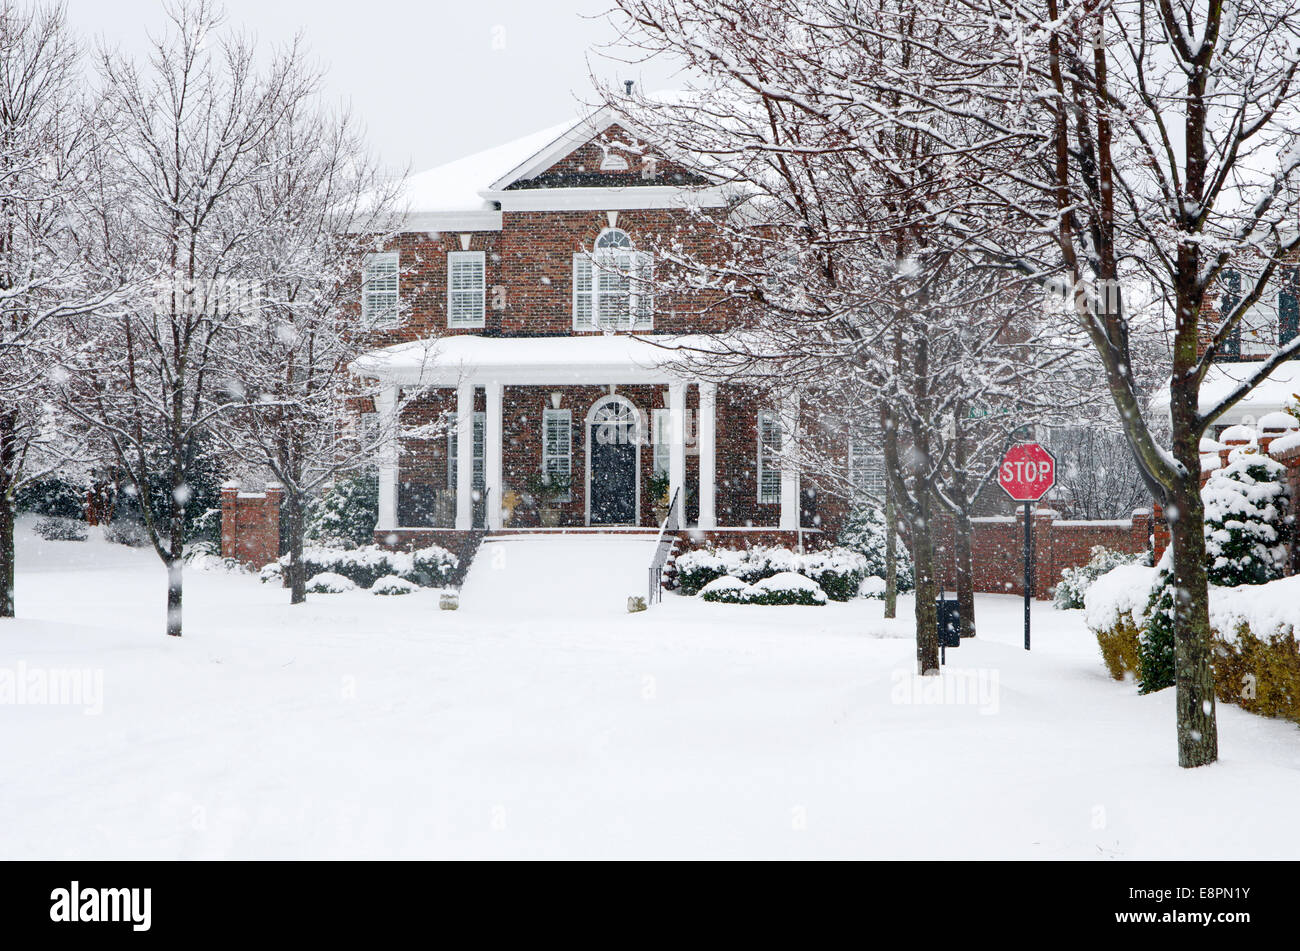 A traditional, brick home is captured during a snow storm in this beautiful, Winter scene. Stock Photo